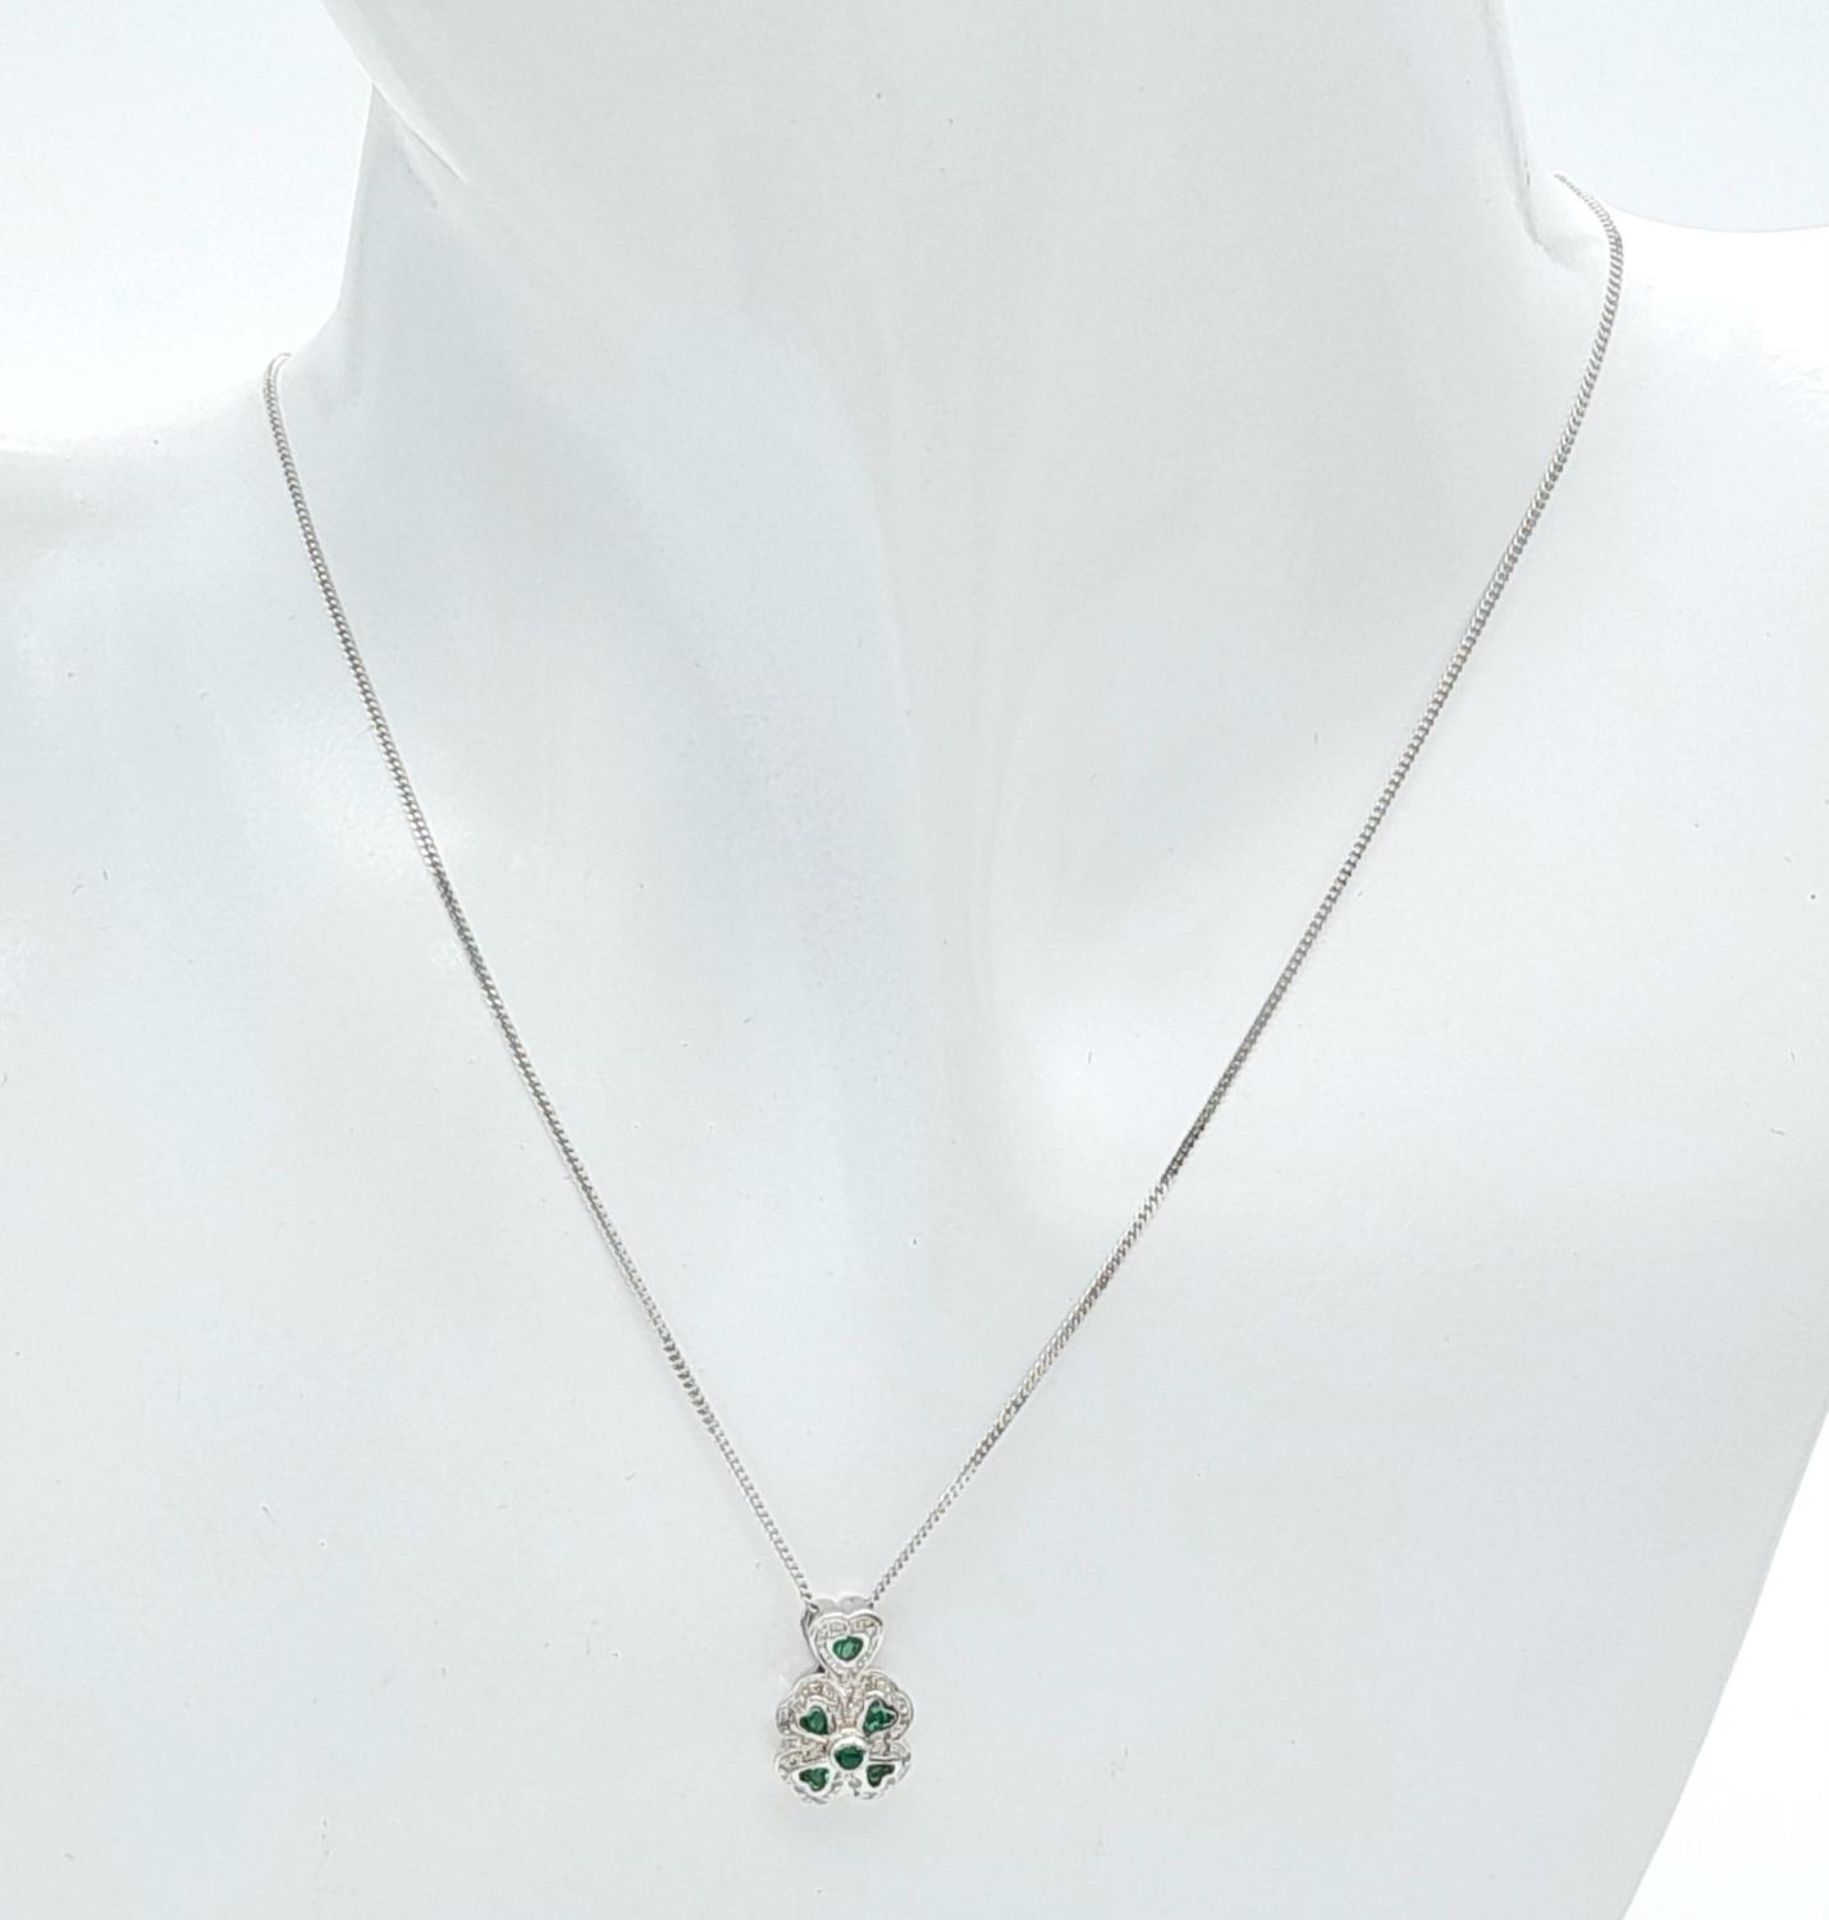 A 9K White Gold Emerald Clover Pendant on Necklace. Comes with presentation case. 1.4cm pendant, - Image 2 of 8